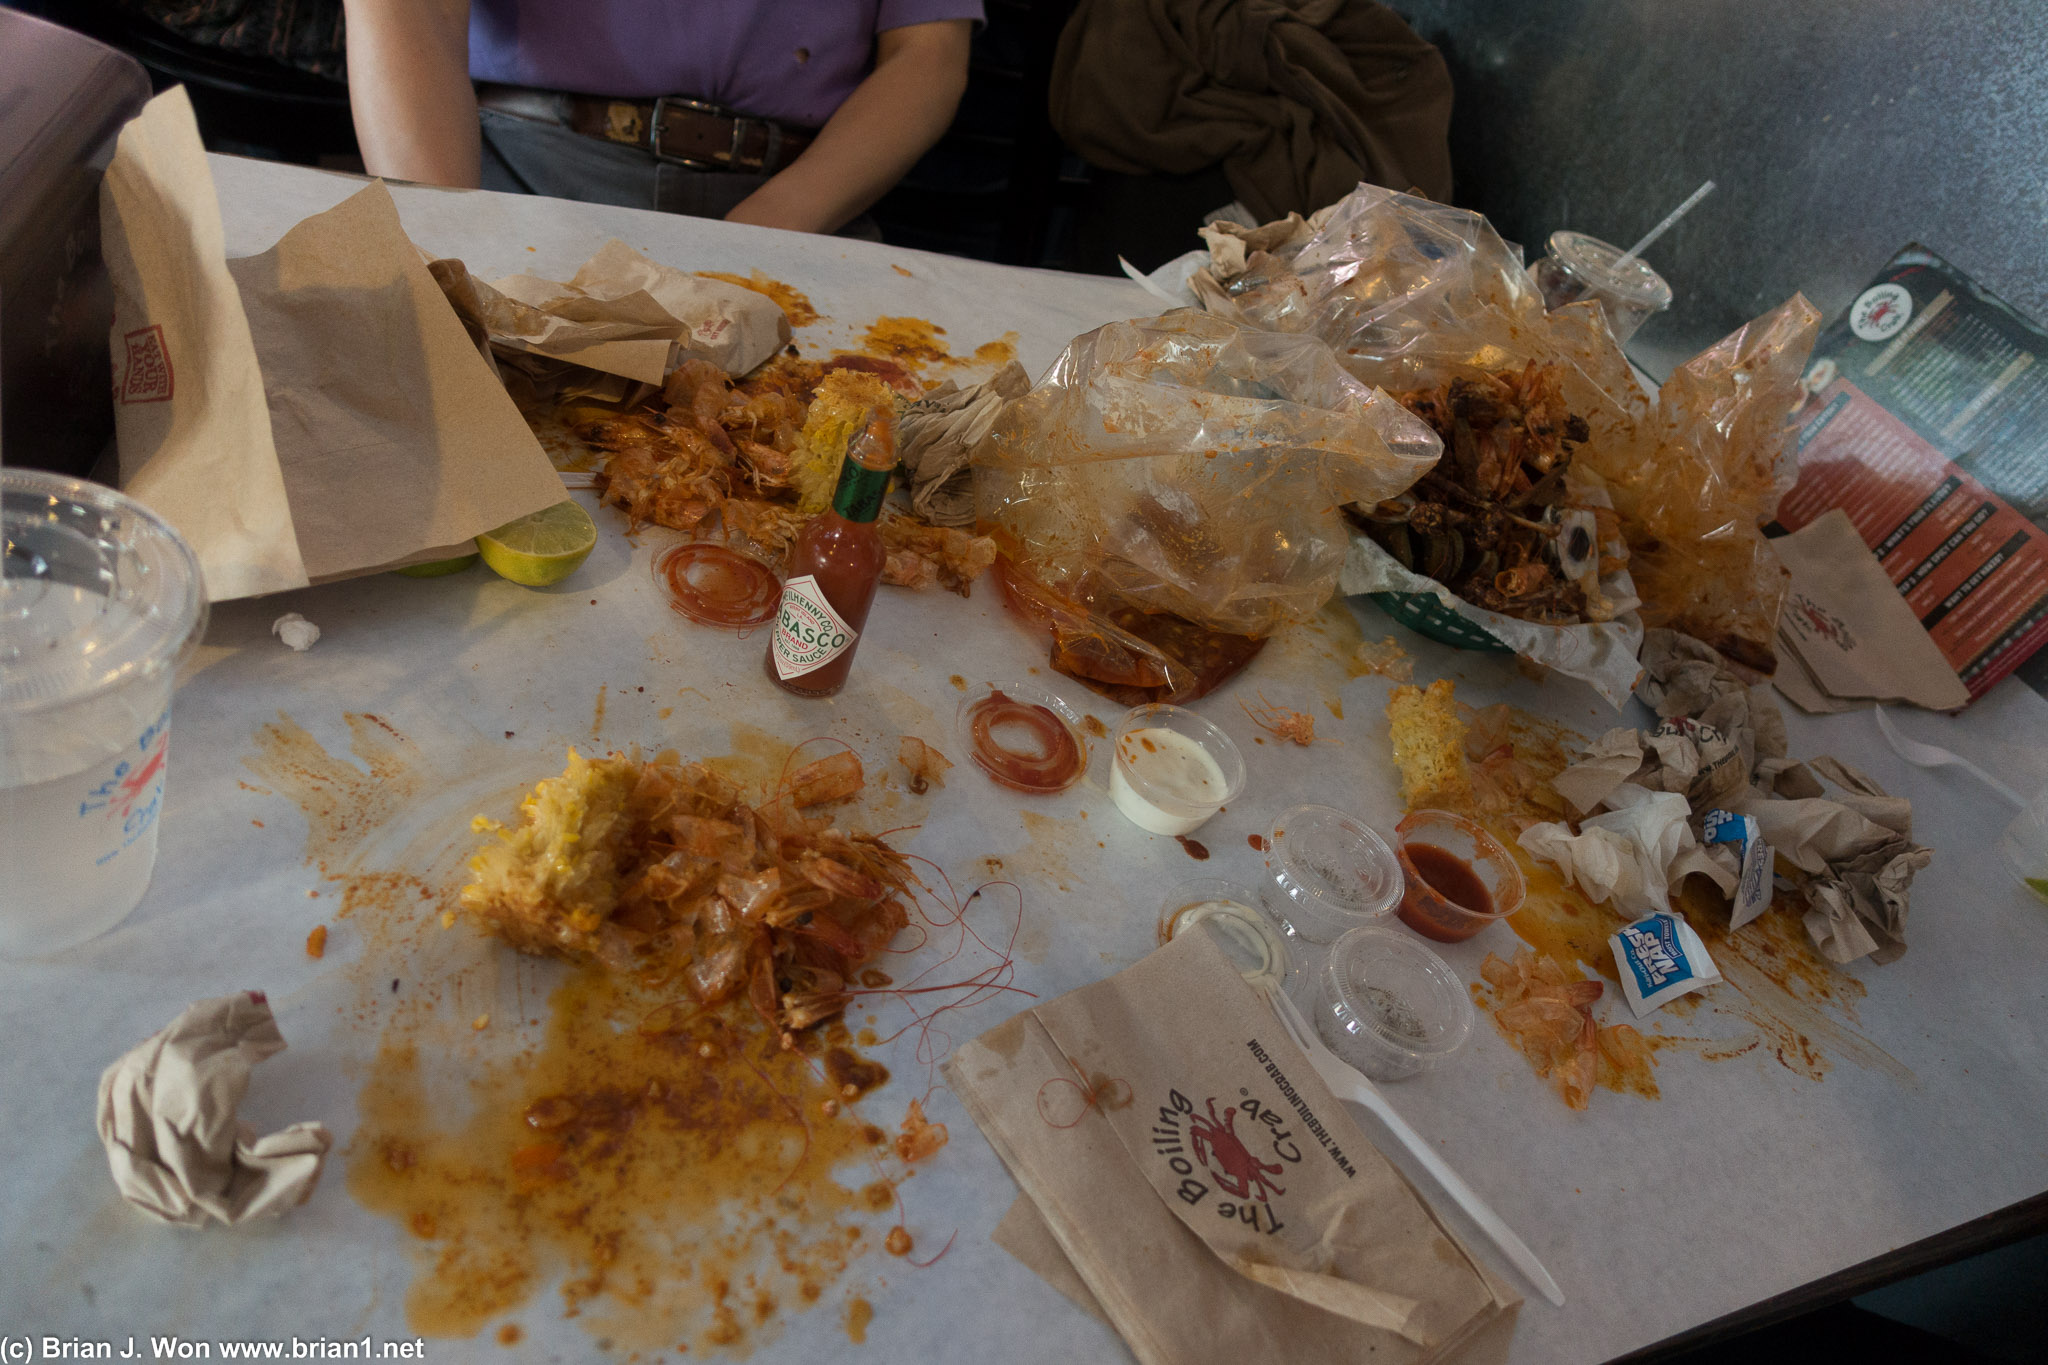 The carnage.